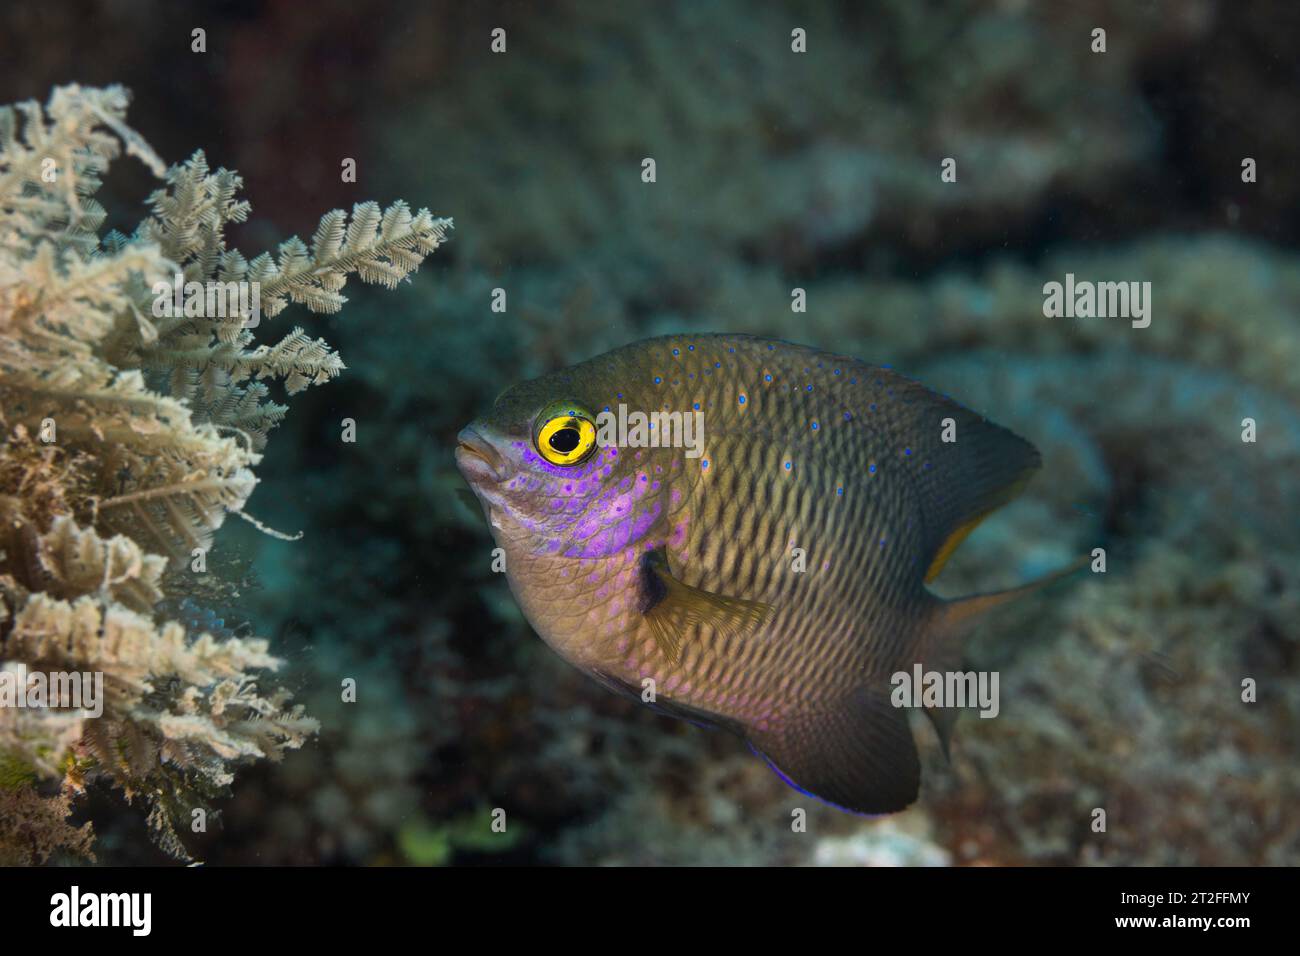 Closeup of a Jewel Damsel fish (Stegastes lacrymatus) overall brown color body with tiny bright blue spots, tropical fish underwater Stock Photo